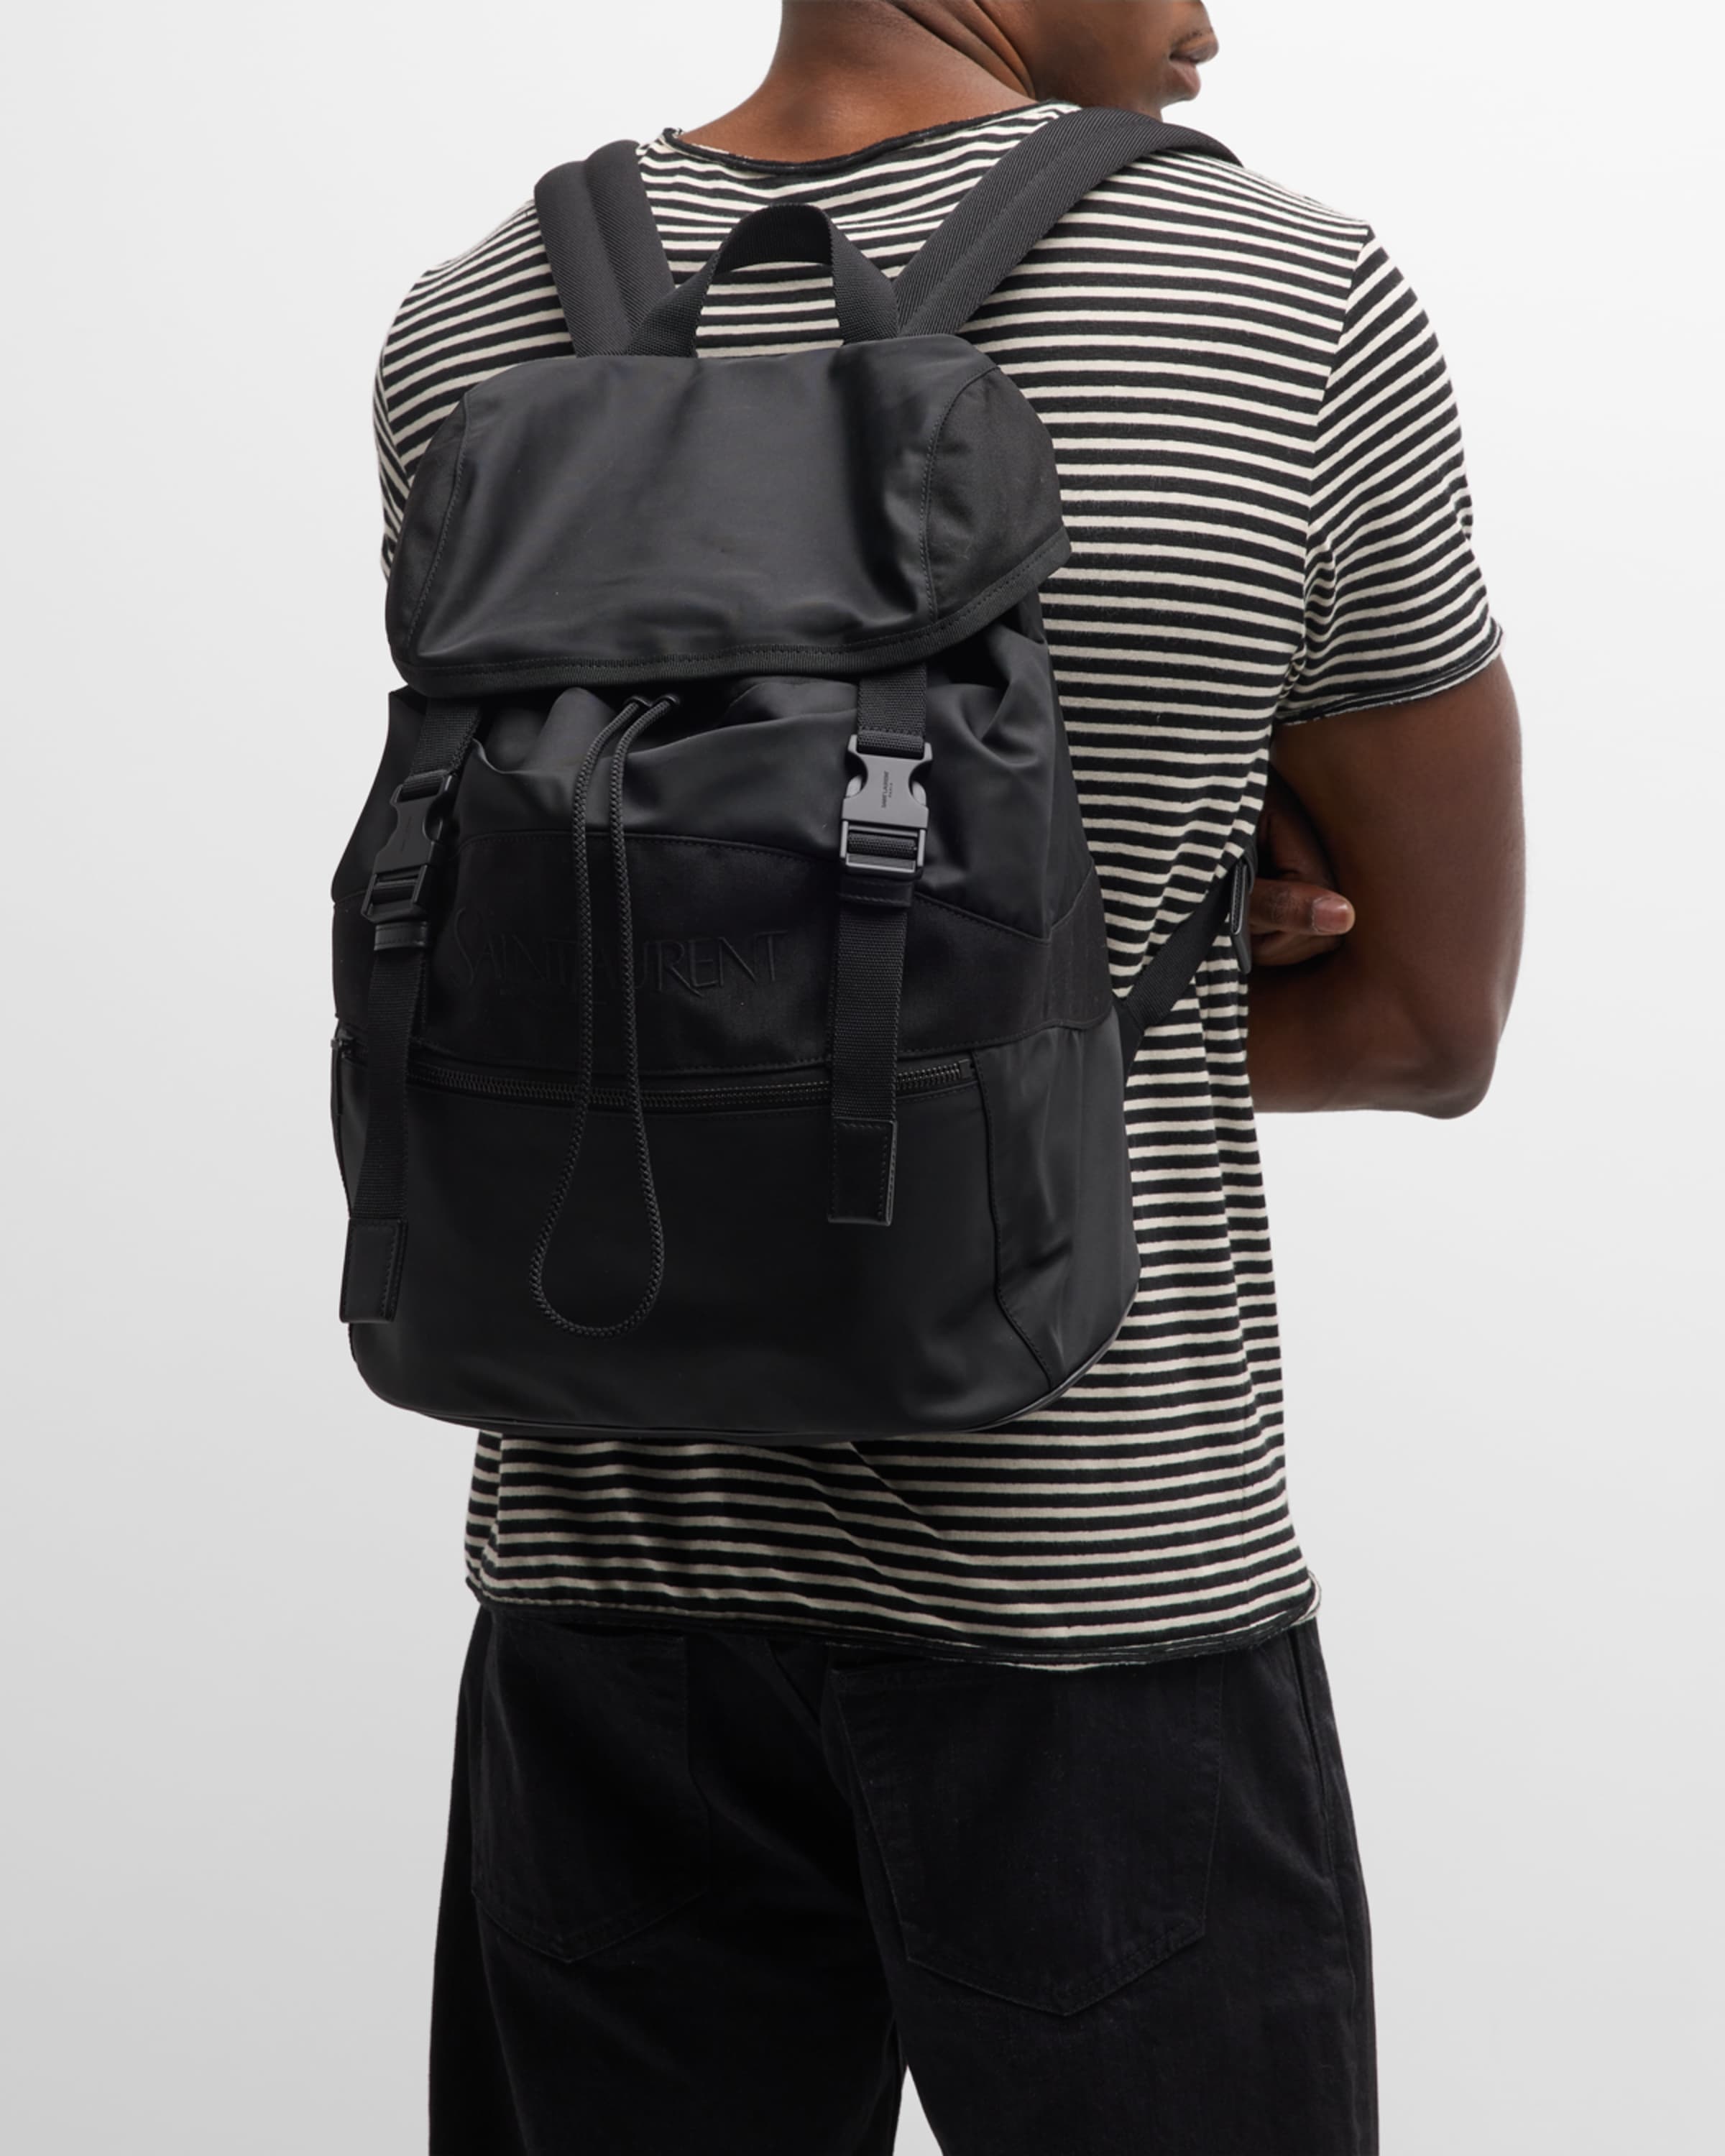 Men's Nylon and Leather Backpack - 3